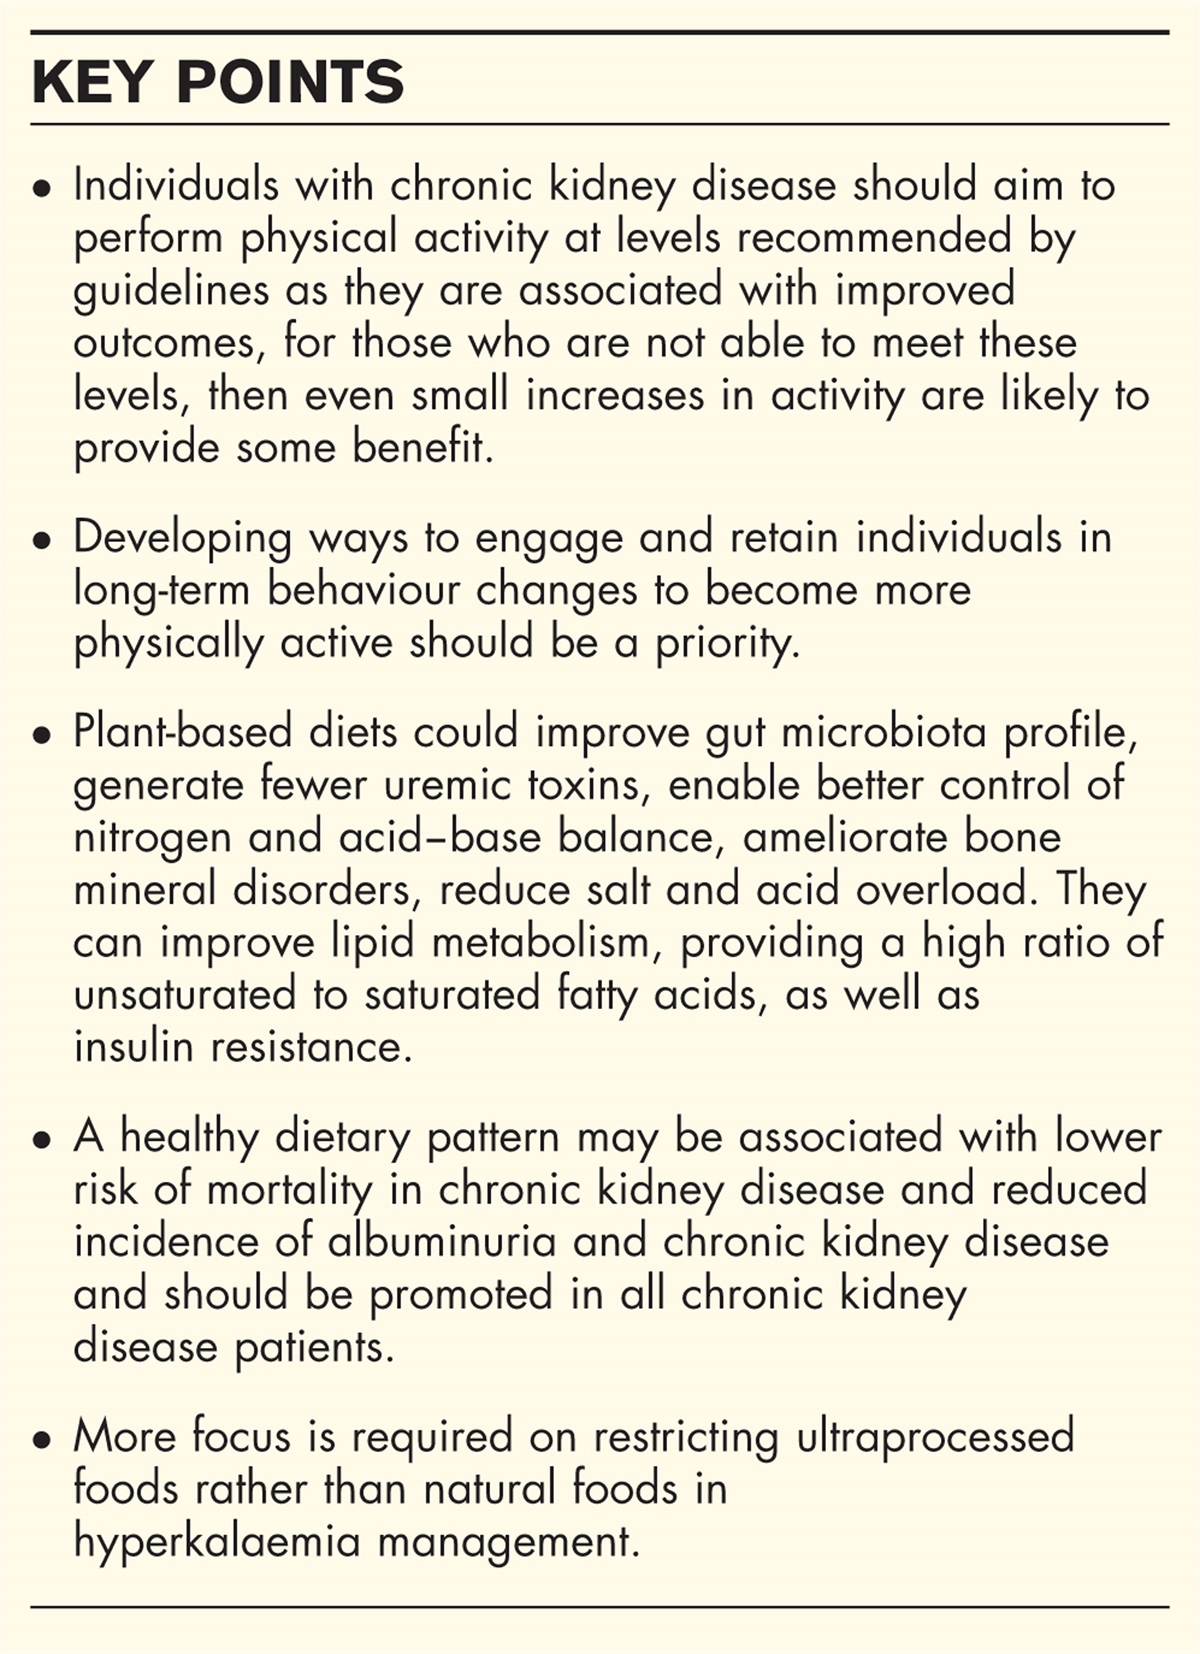 Physical activity and nutrition in chronic kidney disease